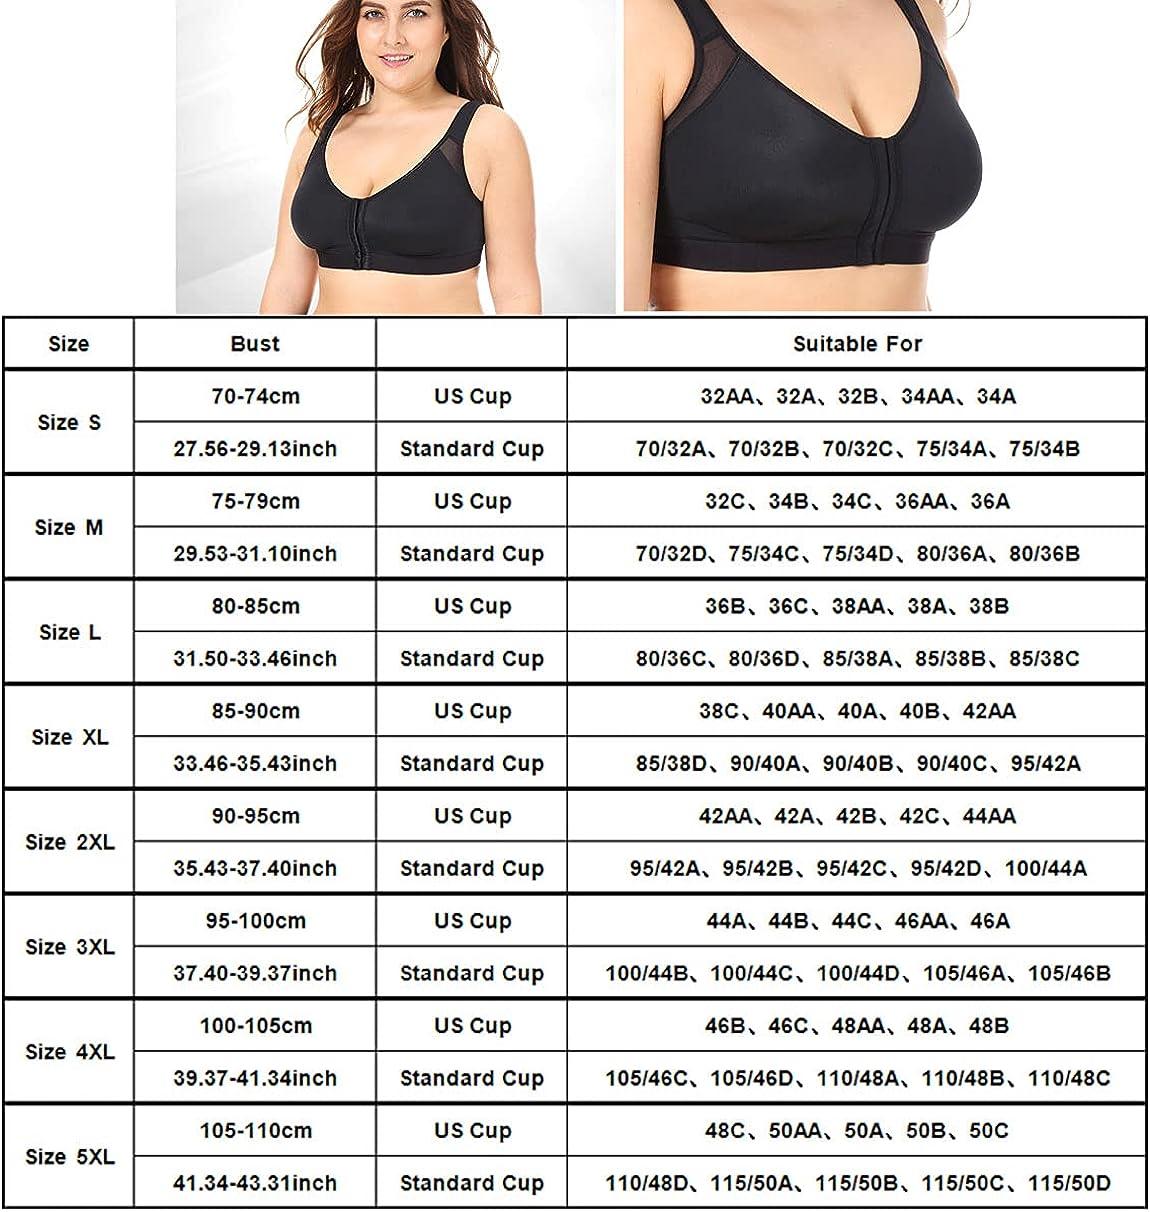 Plus Size Figure Types in 48A Bra Size Front Closure Bras